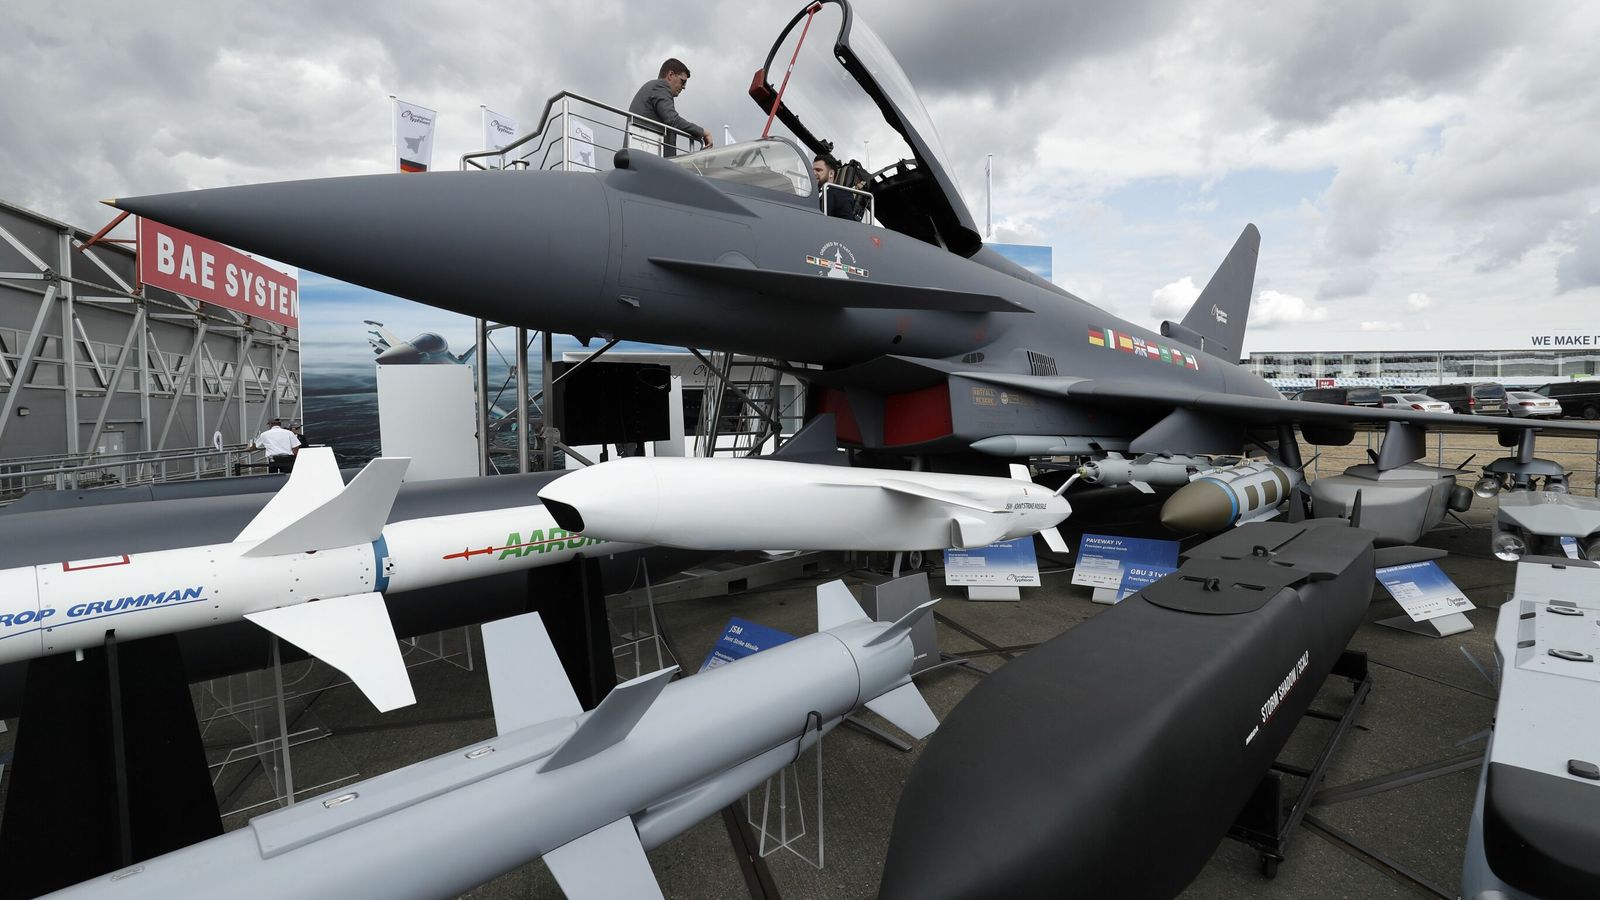 BAE Systems UK arms maker enjoys record year for new orders as West's